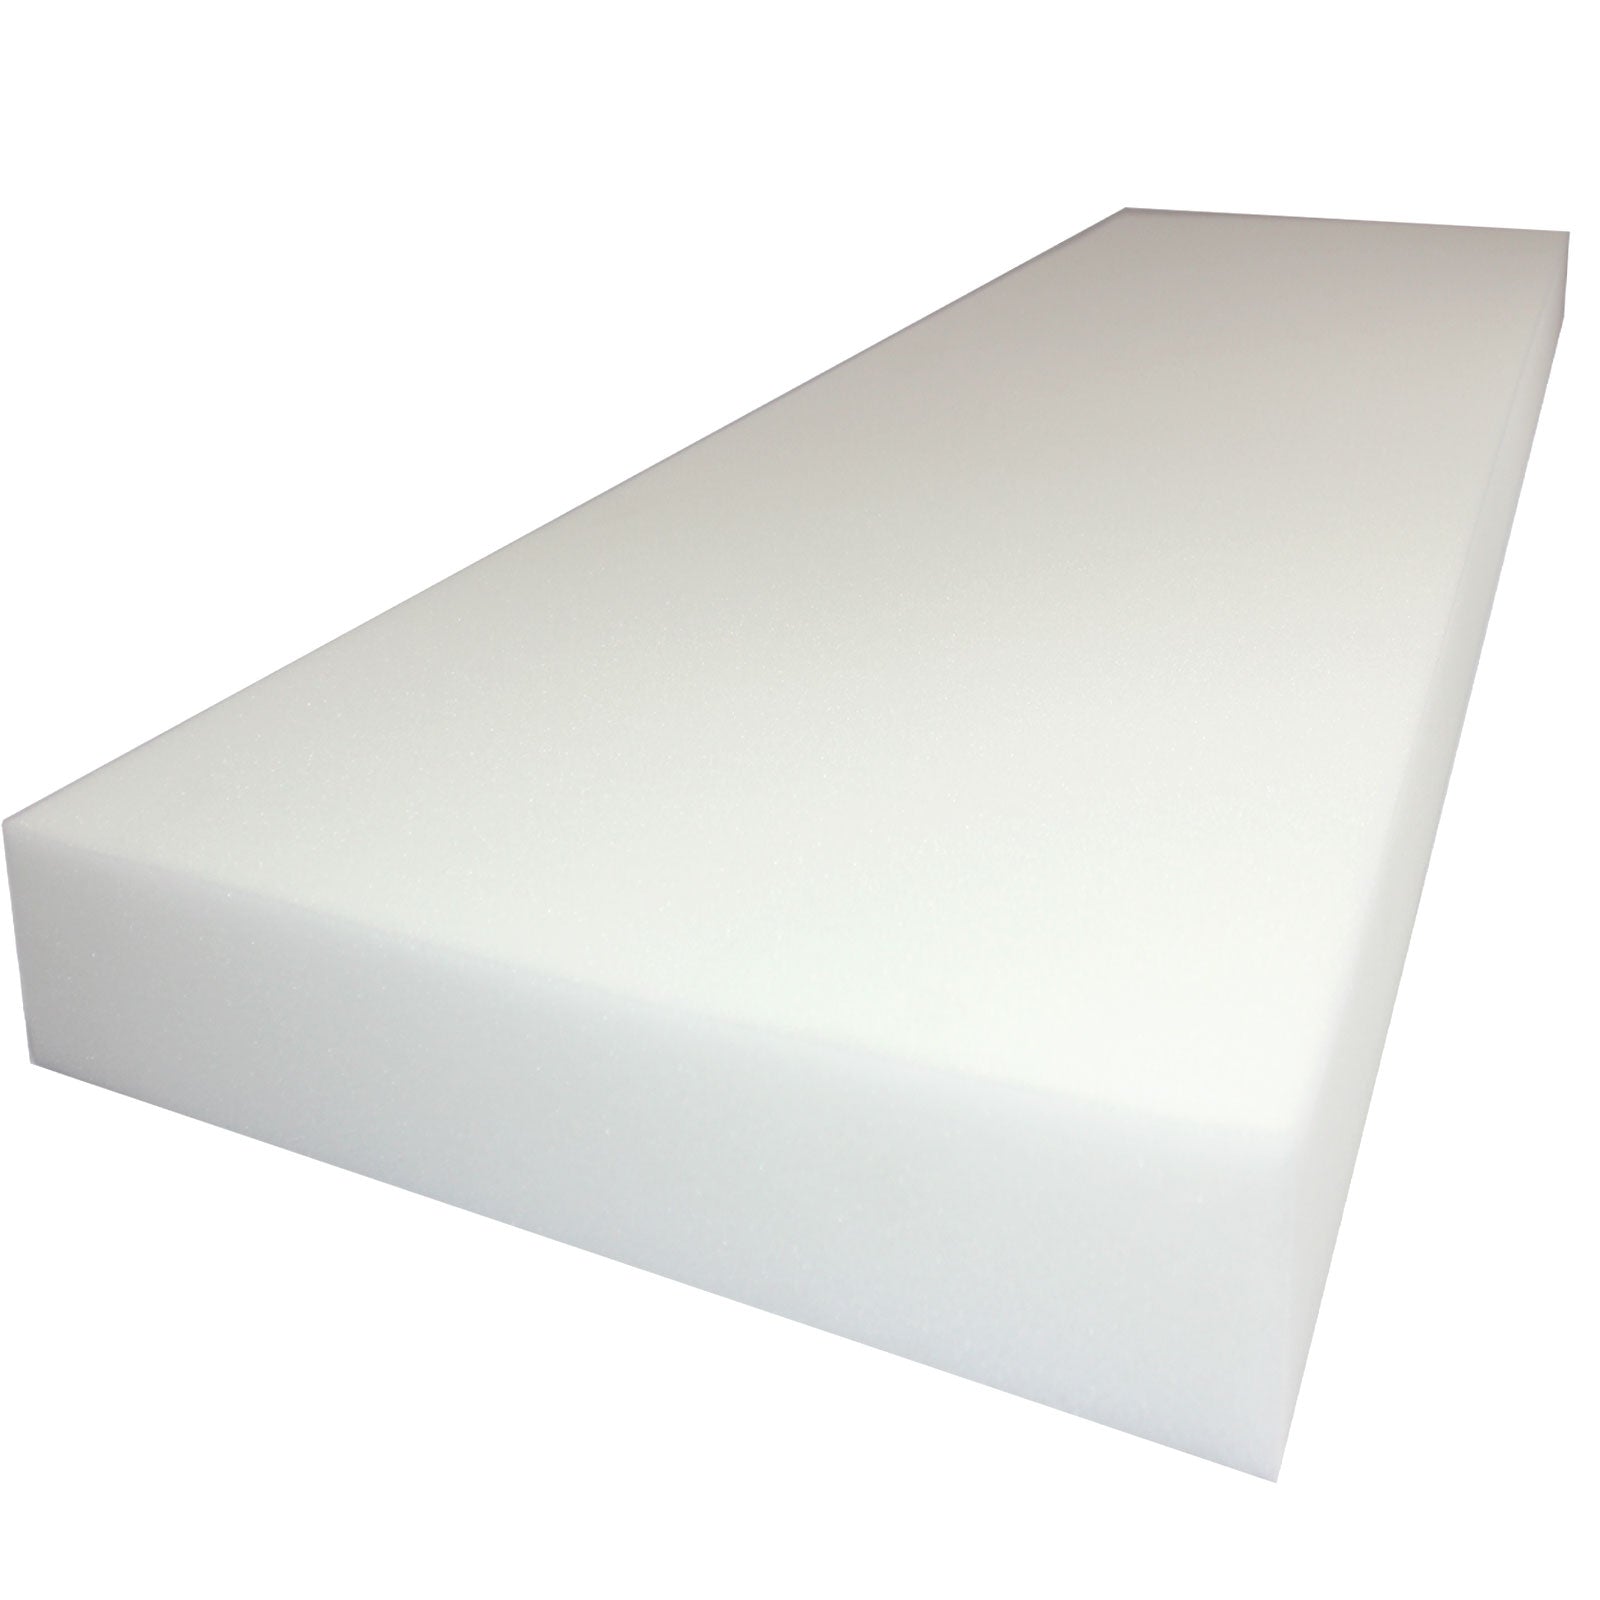  Foamy Foam High Density 2 inch Thick, 30 inch Wide, 84 inch  Long Upholstery Foam, Cushion Replacement : Arts, Crafts & Sewing